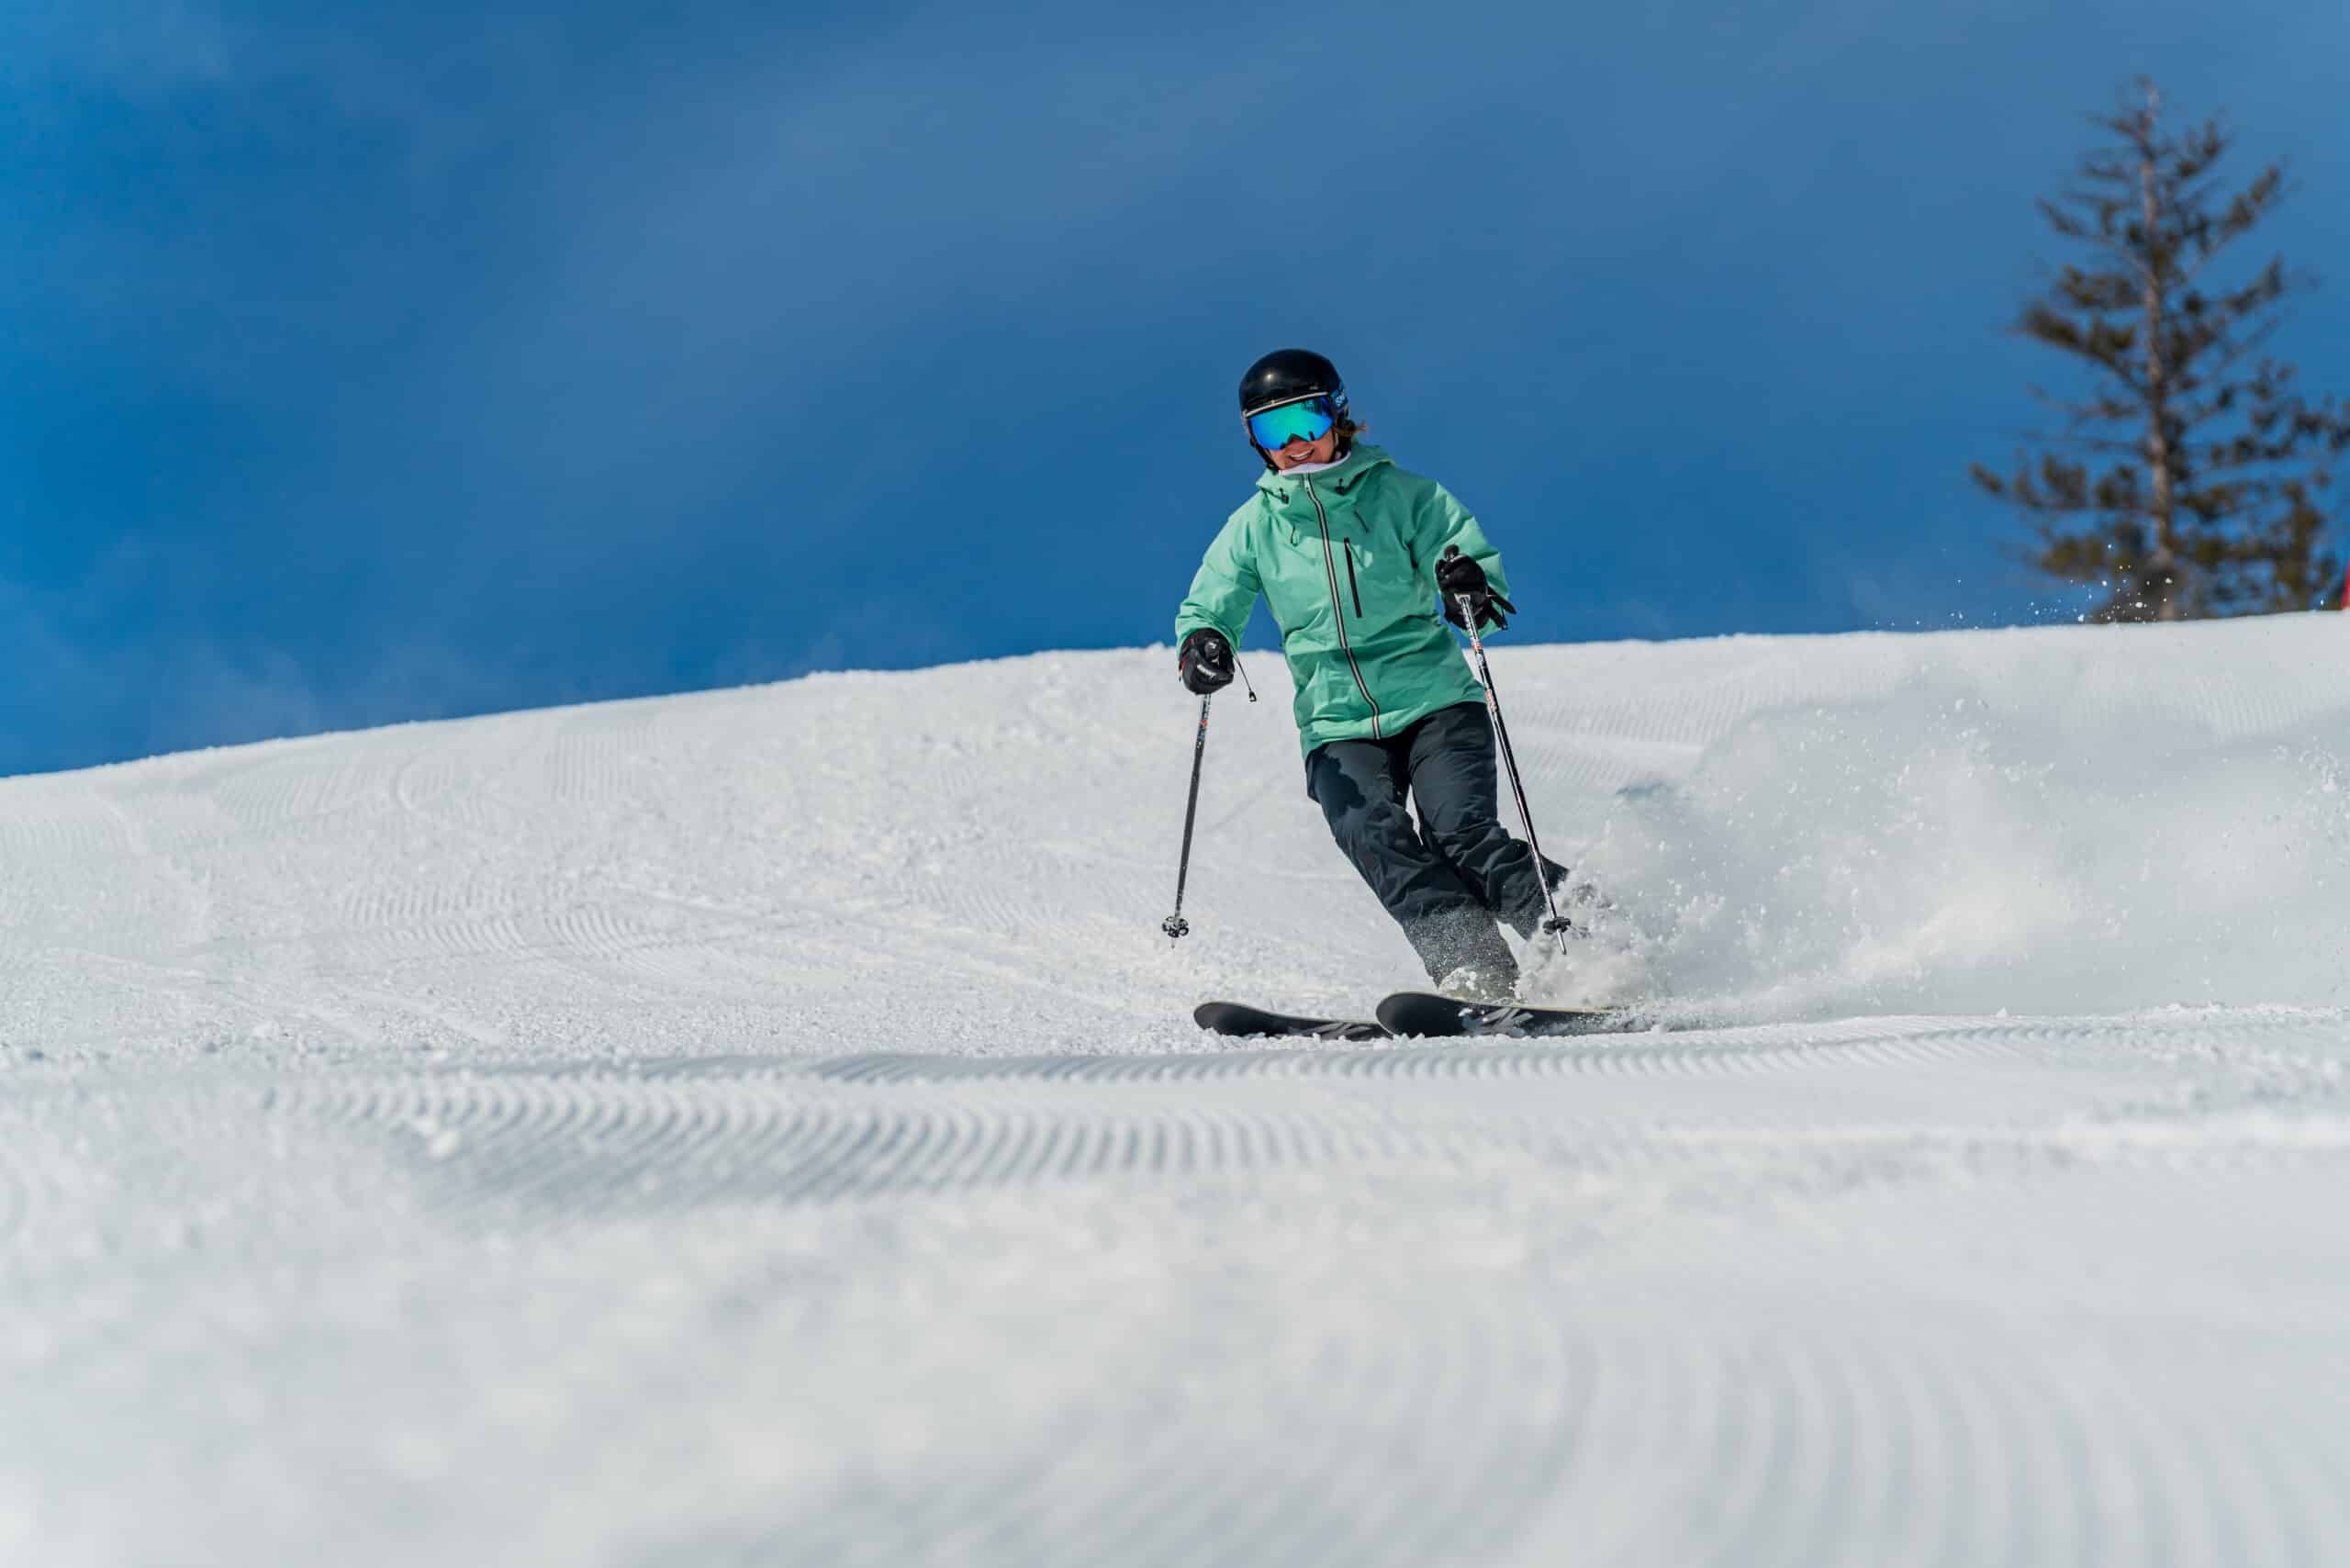 A woman skis on a groomed slope on a bluebird day